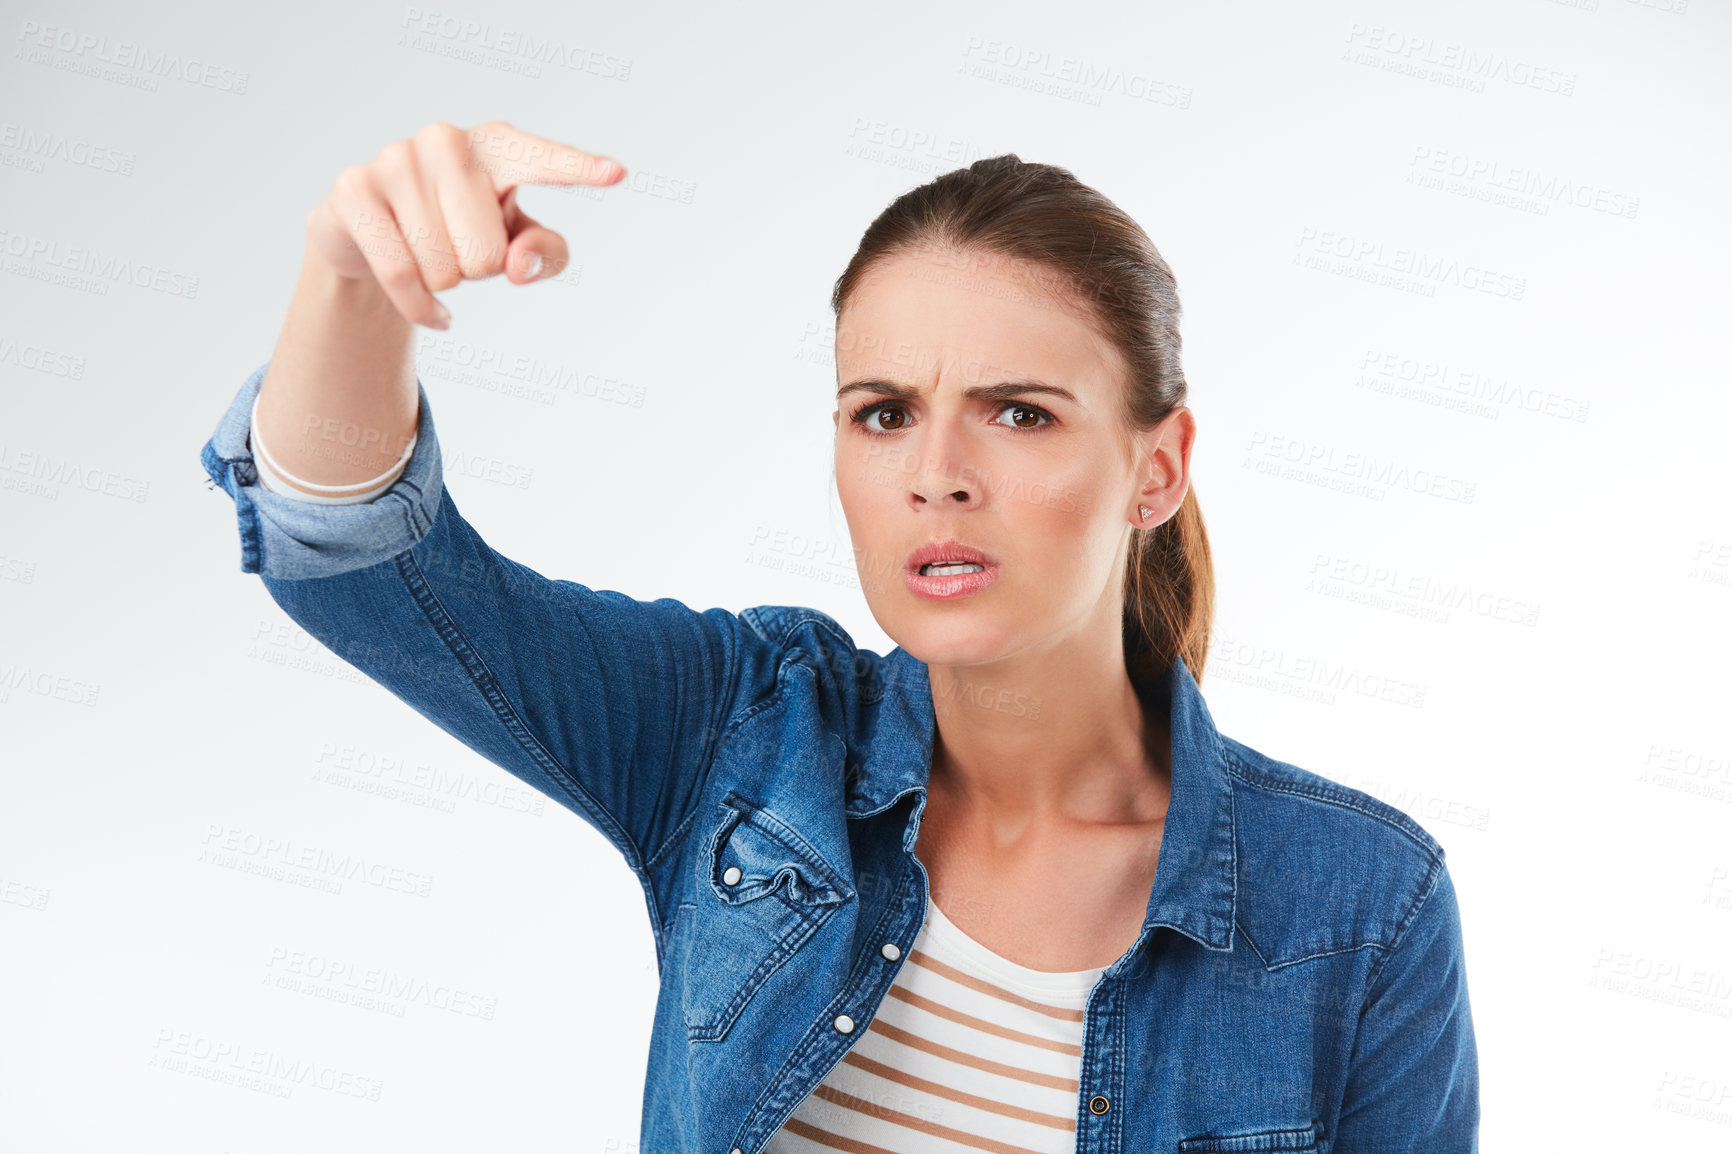 Buy stock photo Studio portrait of a young woman pointing a finger in anger against a grey background